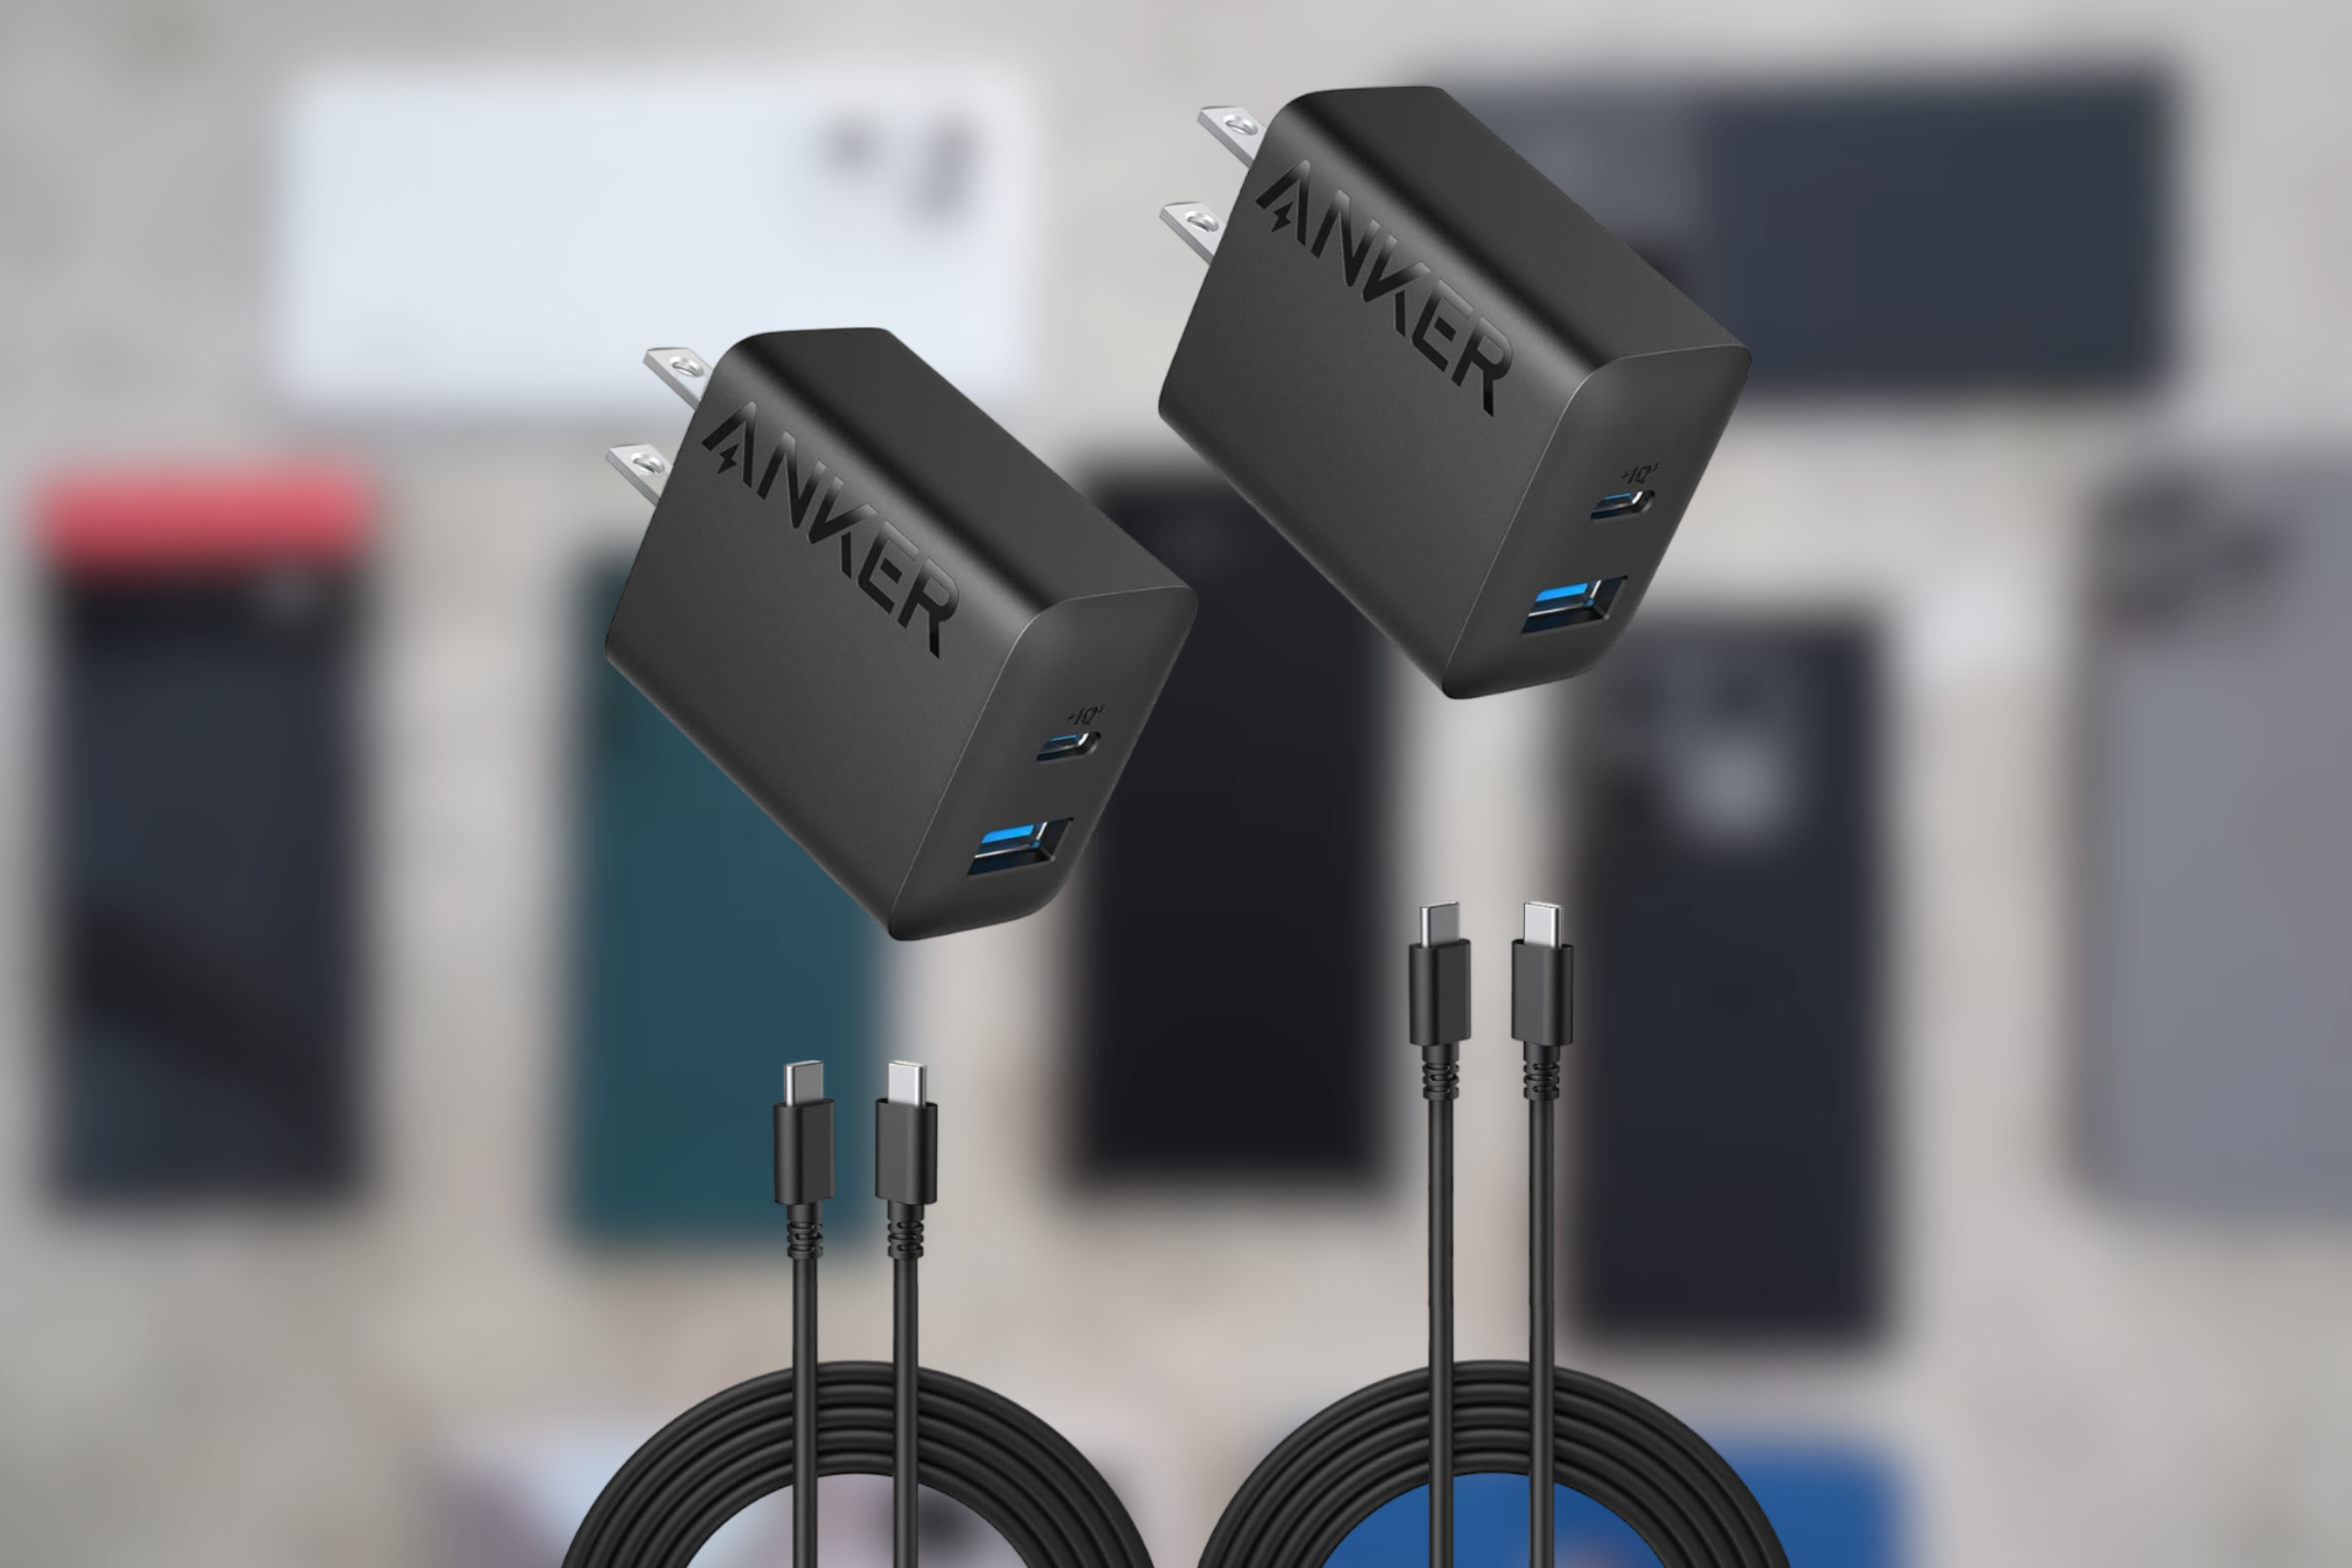 Anker USB C Charger 2-pack in front of phones